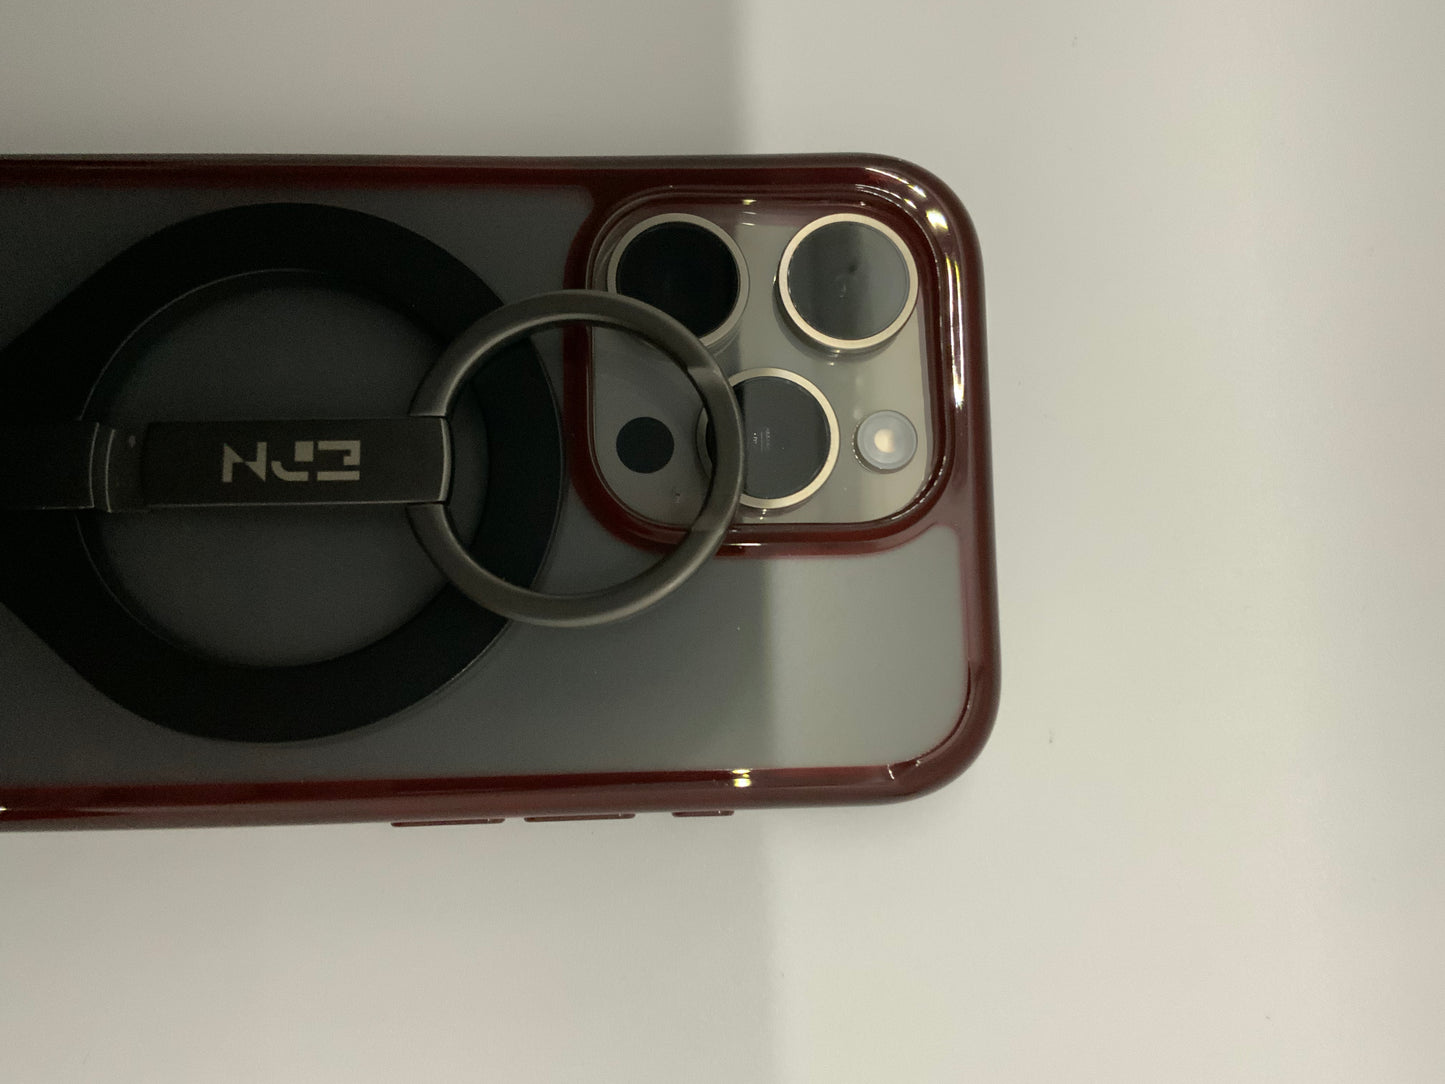 Be My AI: The picture shows a close-up of a few objects on a white surface. On the right side, there is a part of a phone with a red case. The phone has a camera module with three lenses and a flash. On the left side, there is a black object with a circular base and a metal ring attached to it. The metal ring is attached to a black rectangular piece with the letters "N" and "E" visible on it, suggesting that it might be a brand or model name. The objects are placed close to each other.